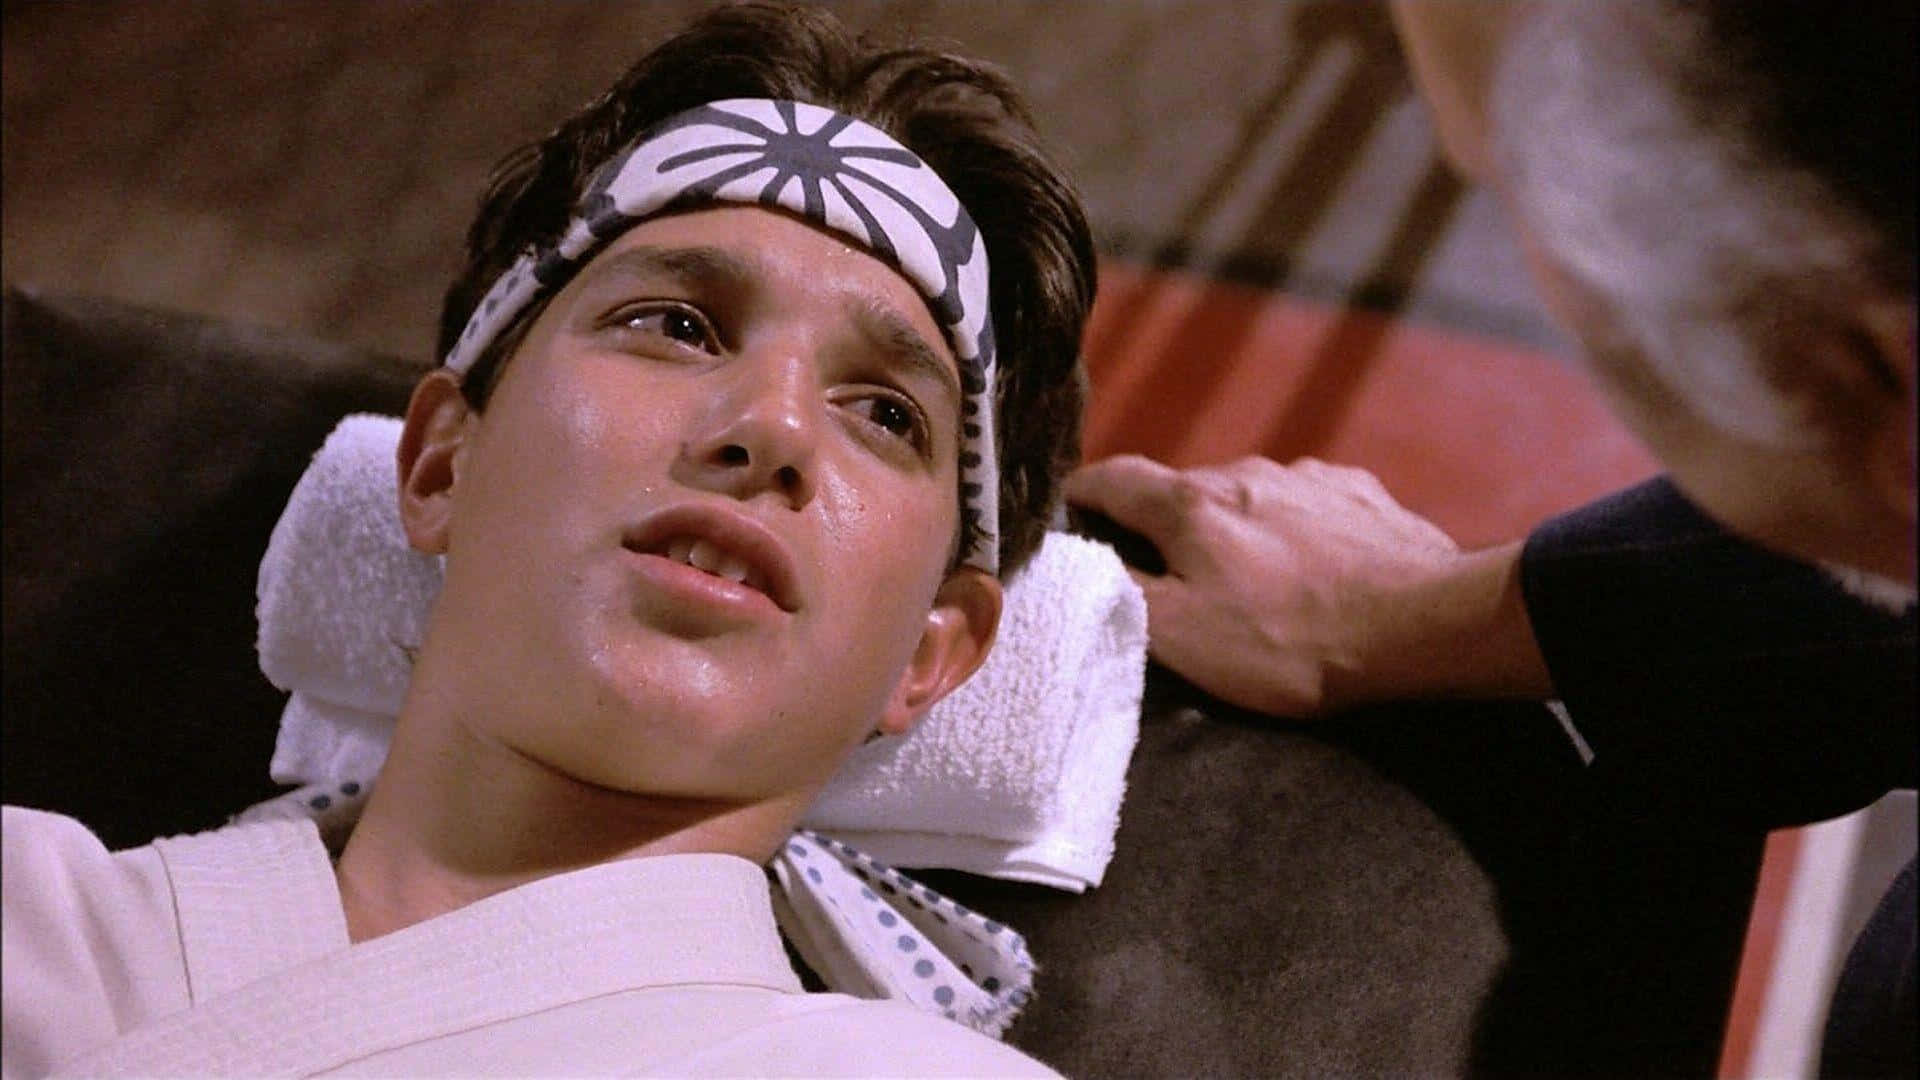 Actor Ralph Macchio pictured in iconic Karate Kid stance Wallpaper